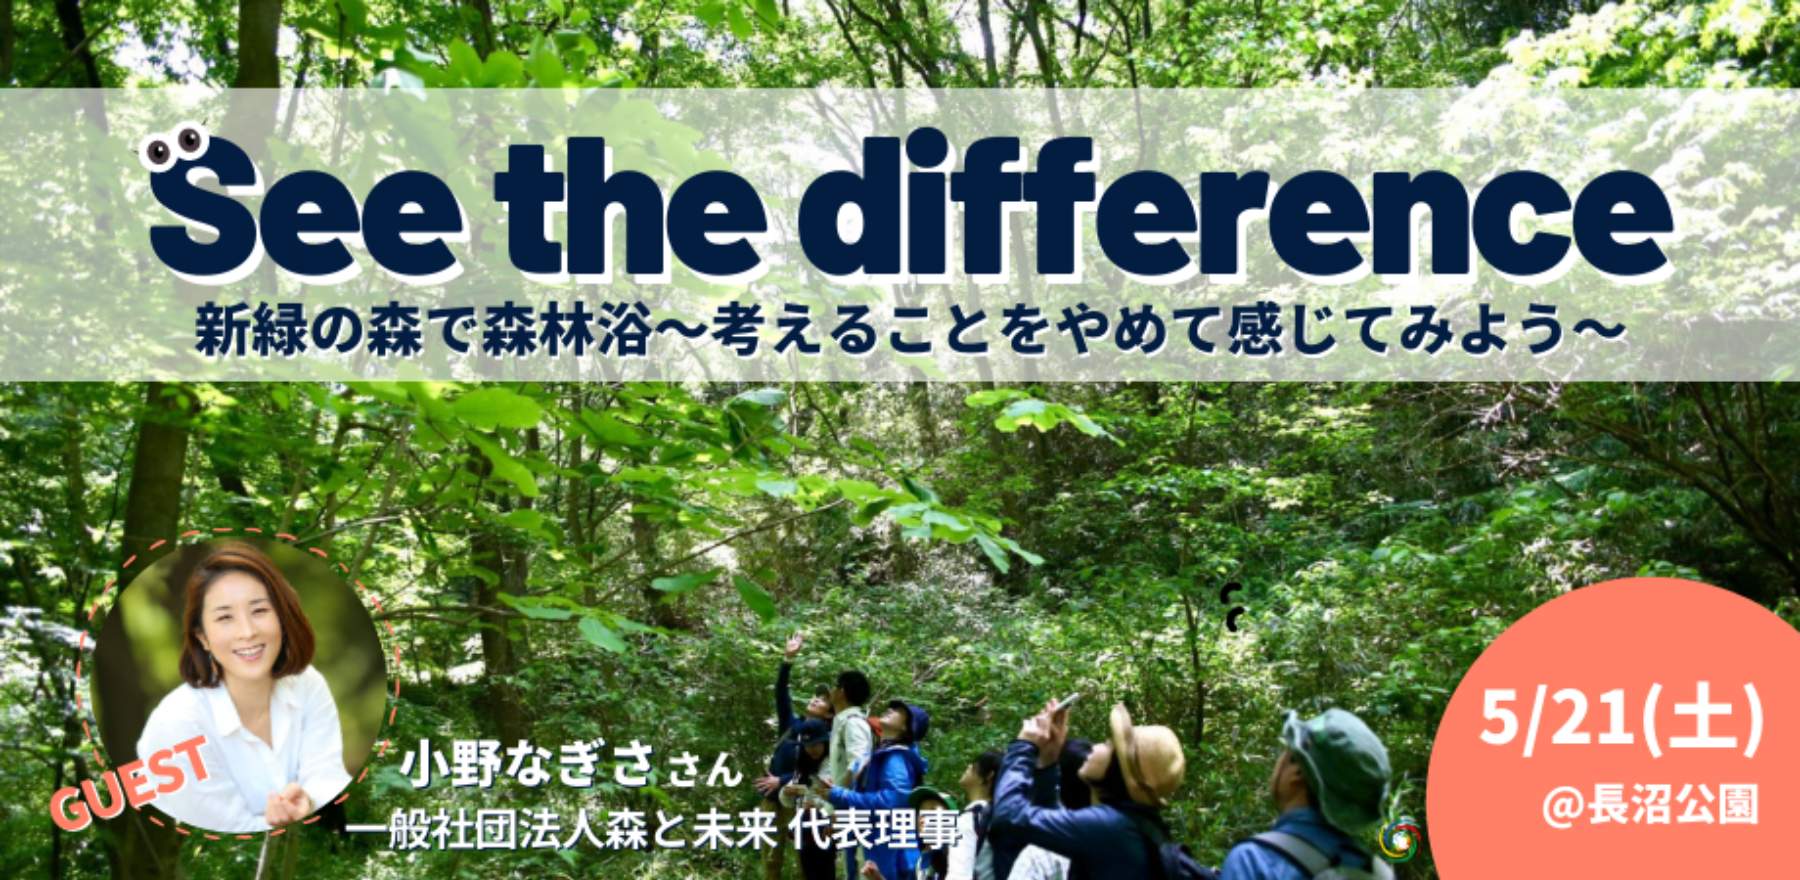 See the difference 新緑の森で森林浴〜考えることをやめて感じてみよう〜
